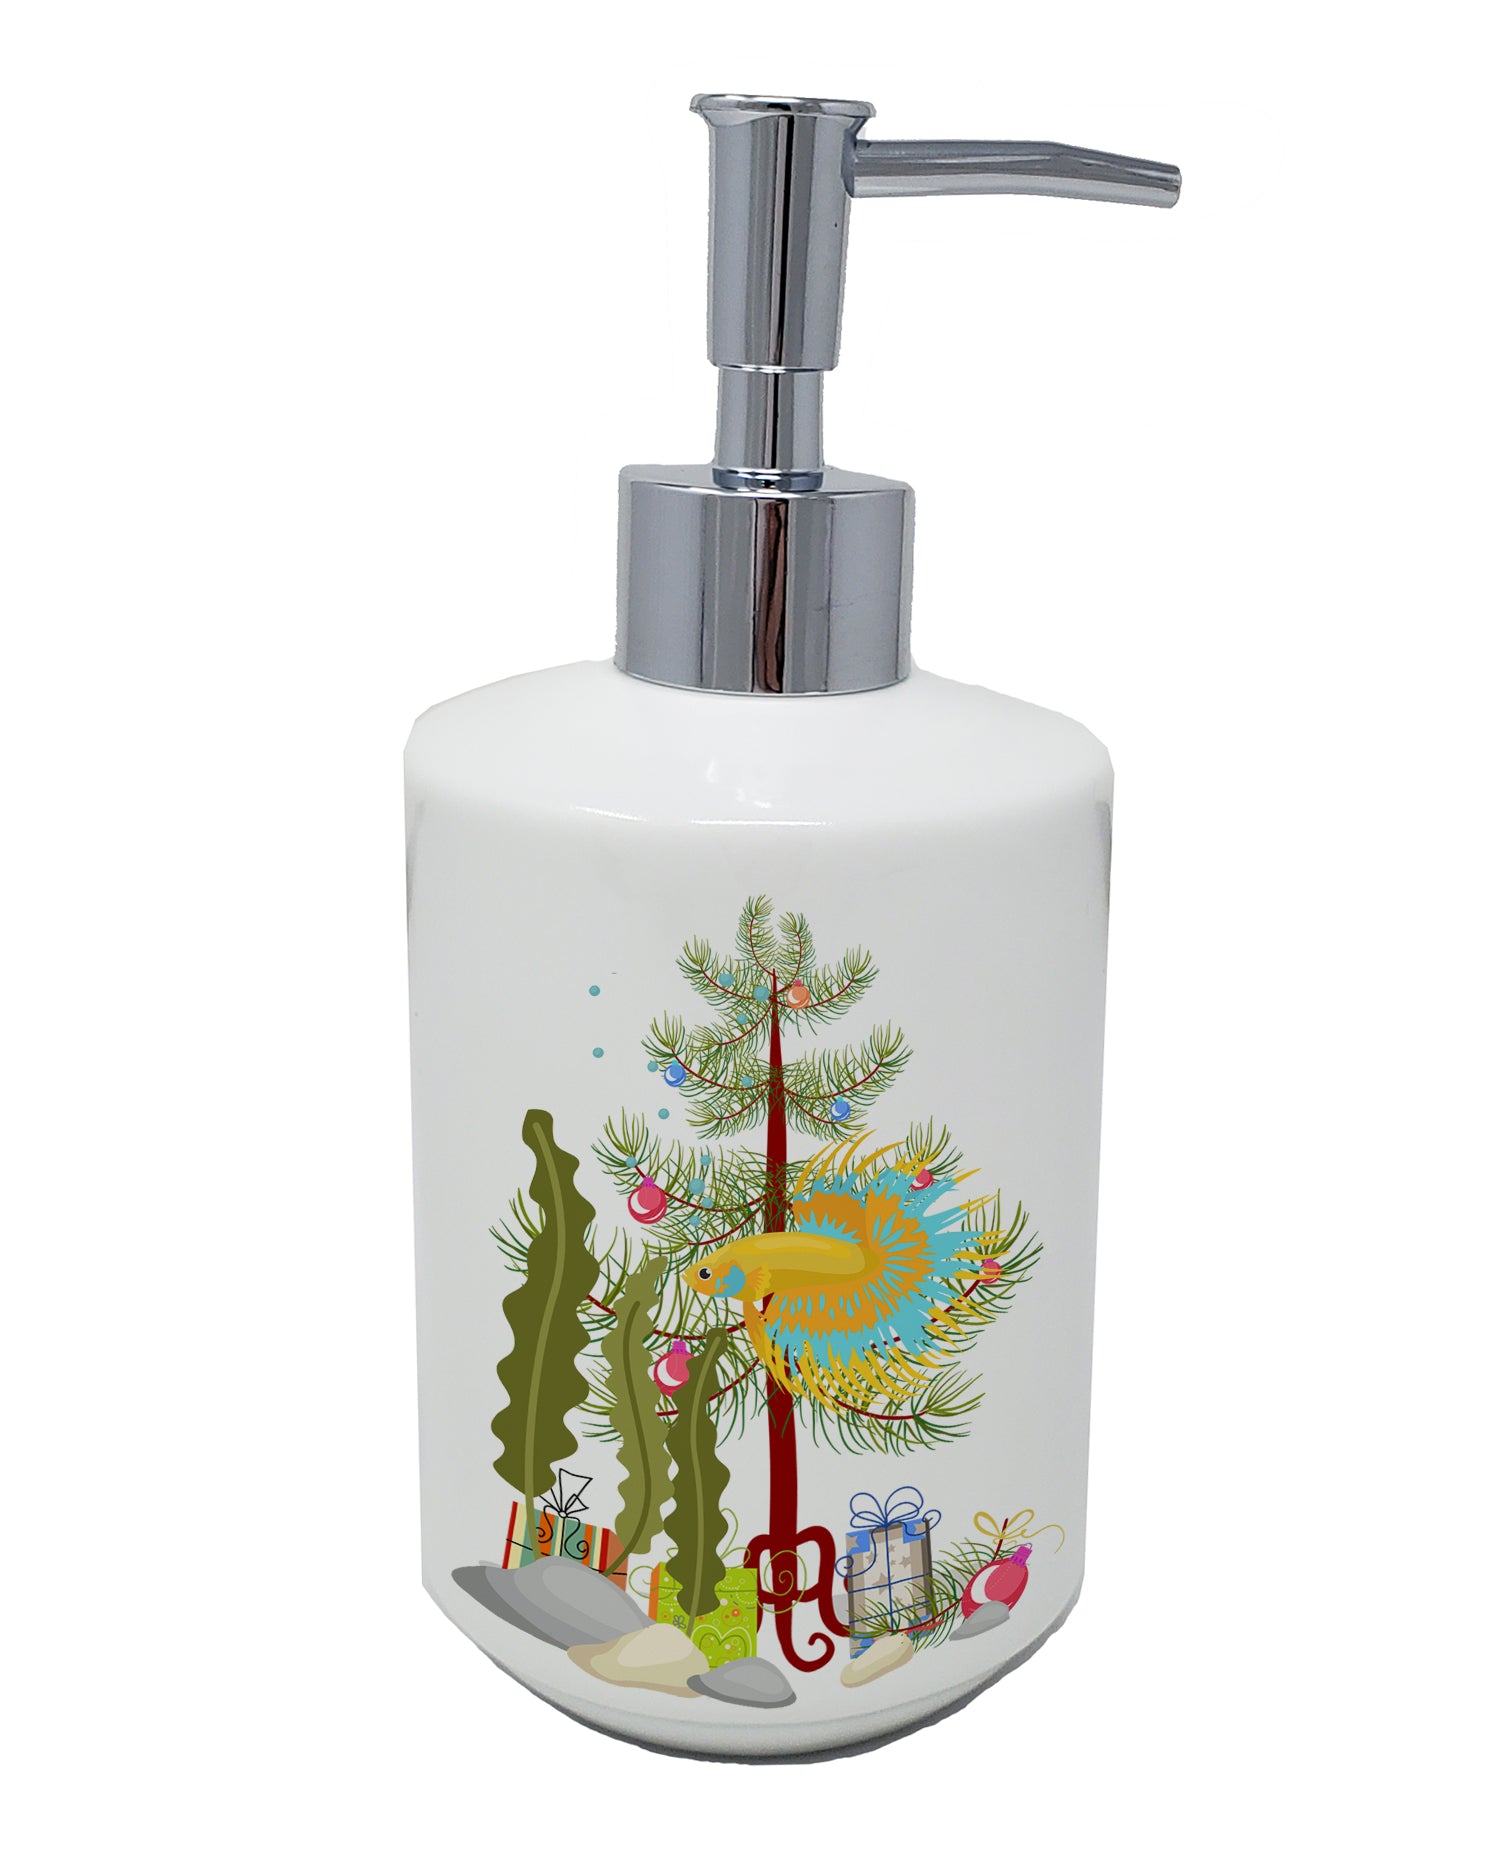 Buy this CrownTail Betta Merry Christmas Ceramic Soap Dispenser